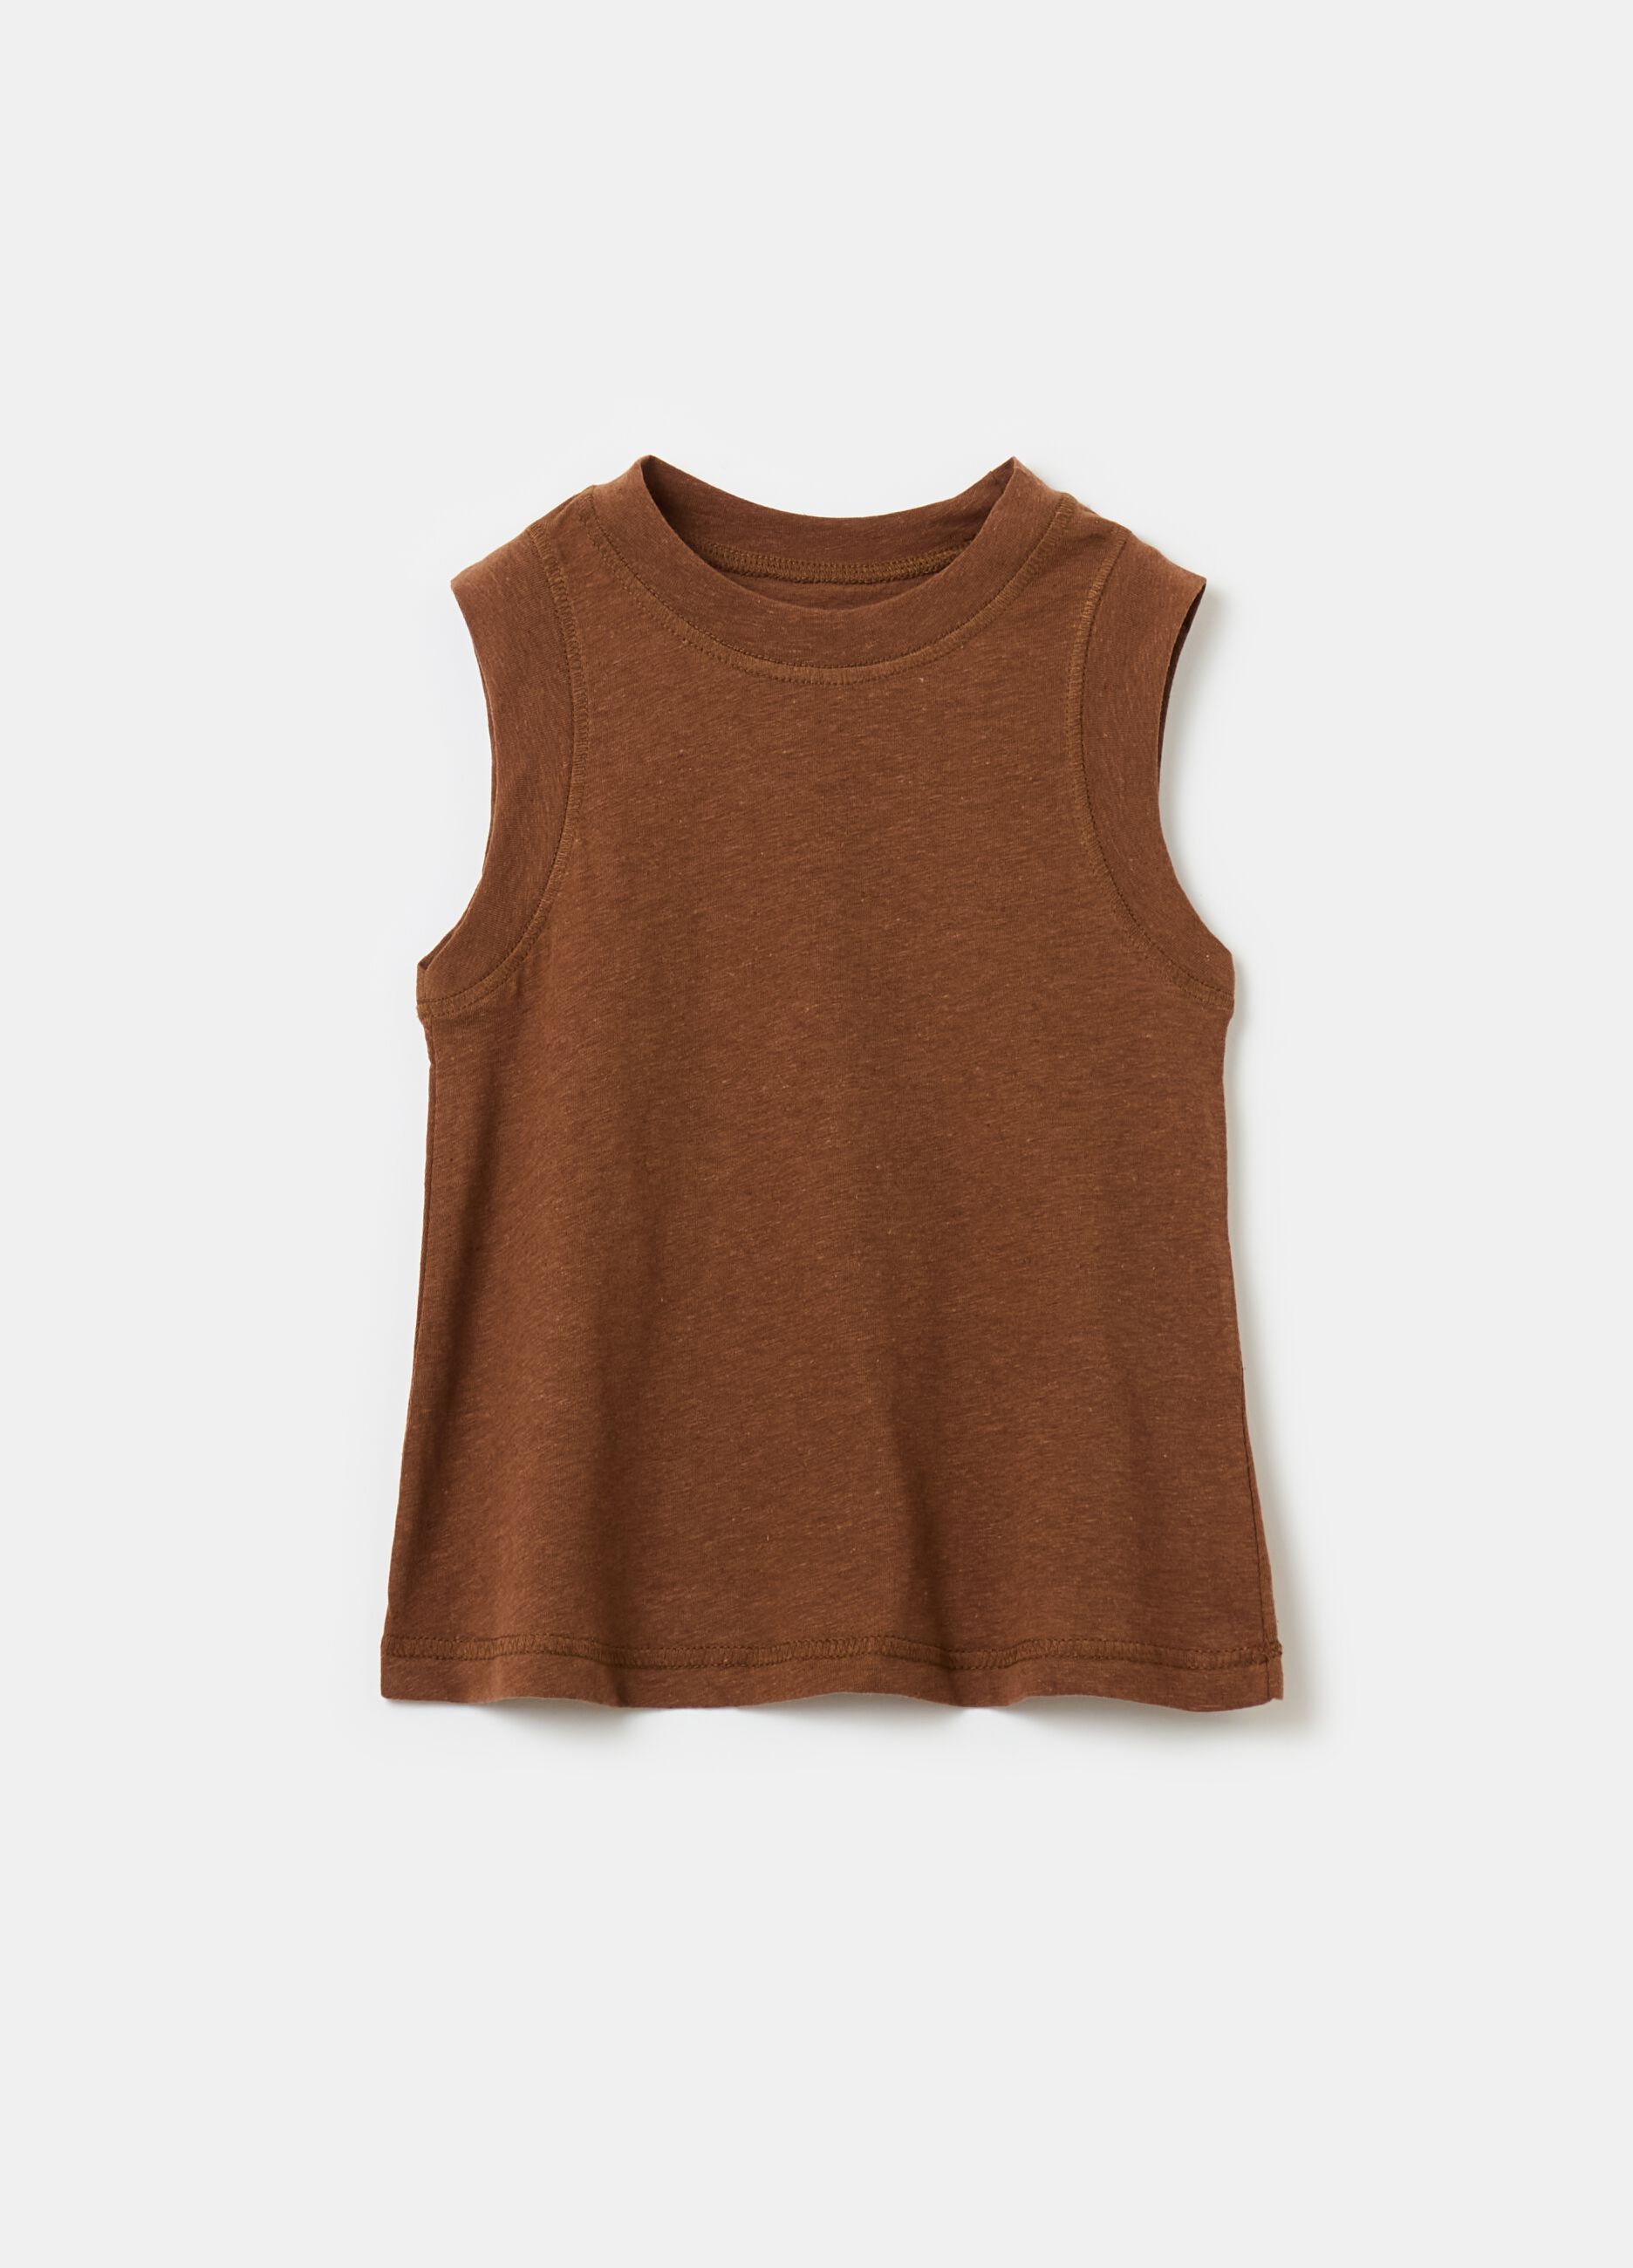 Cotton and linen tank top